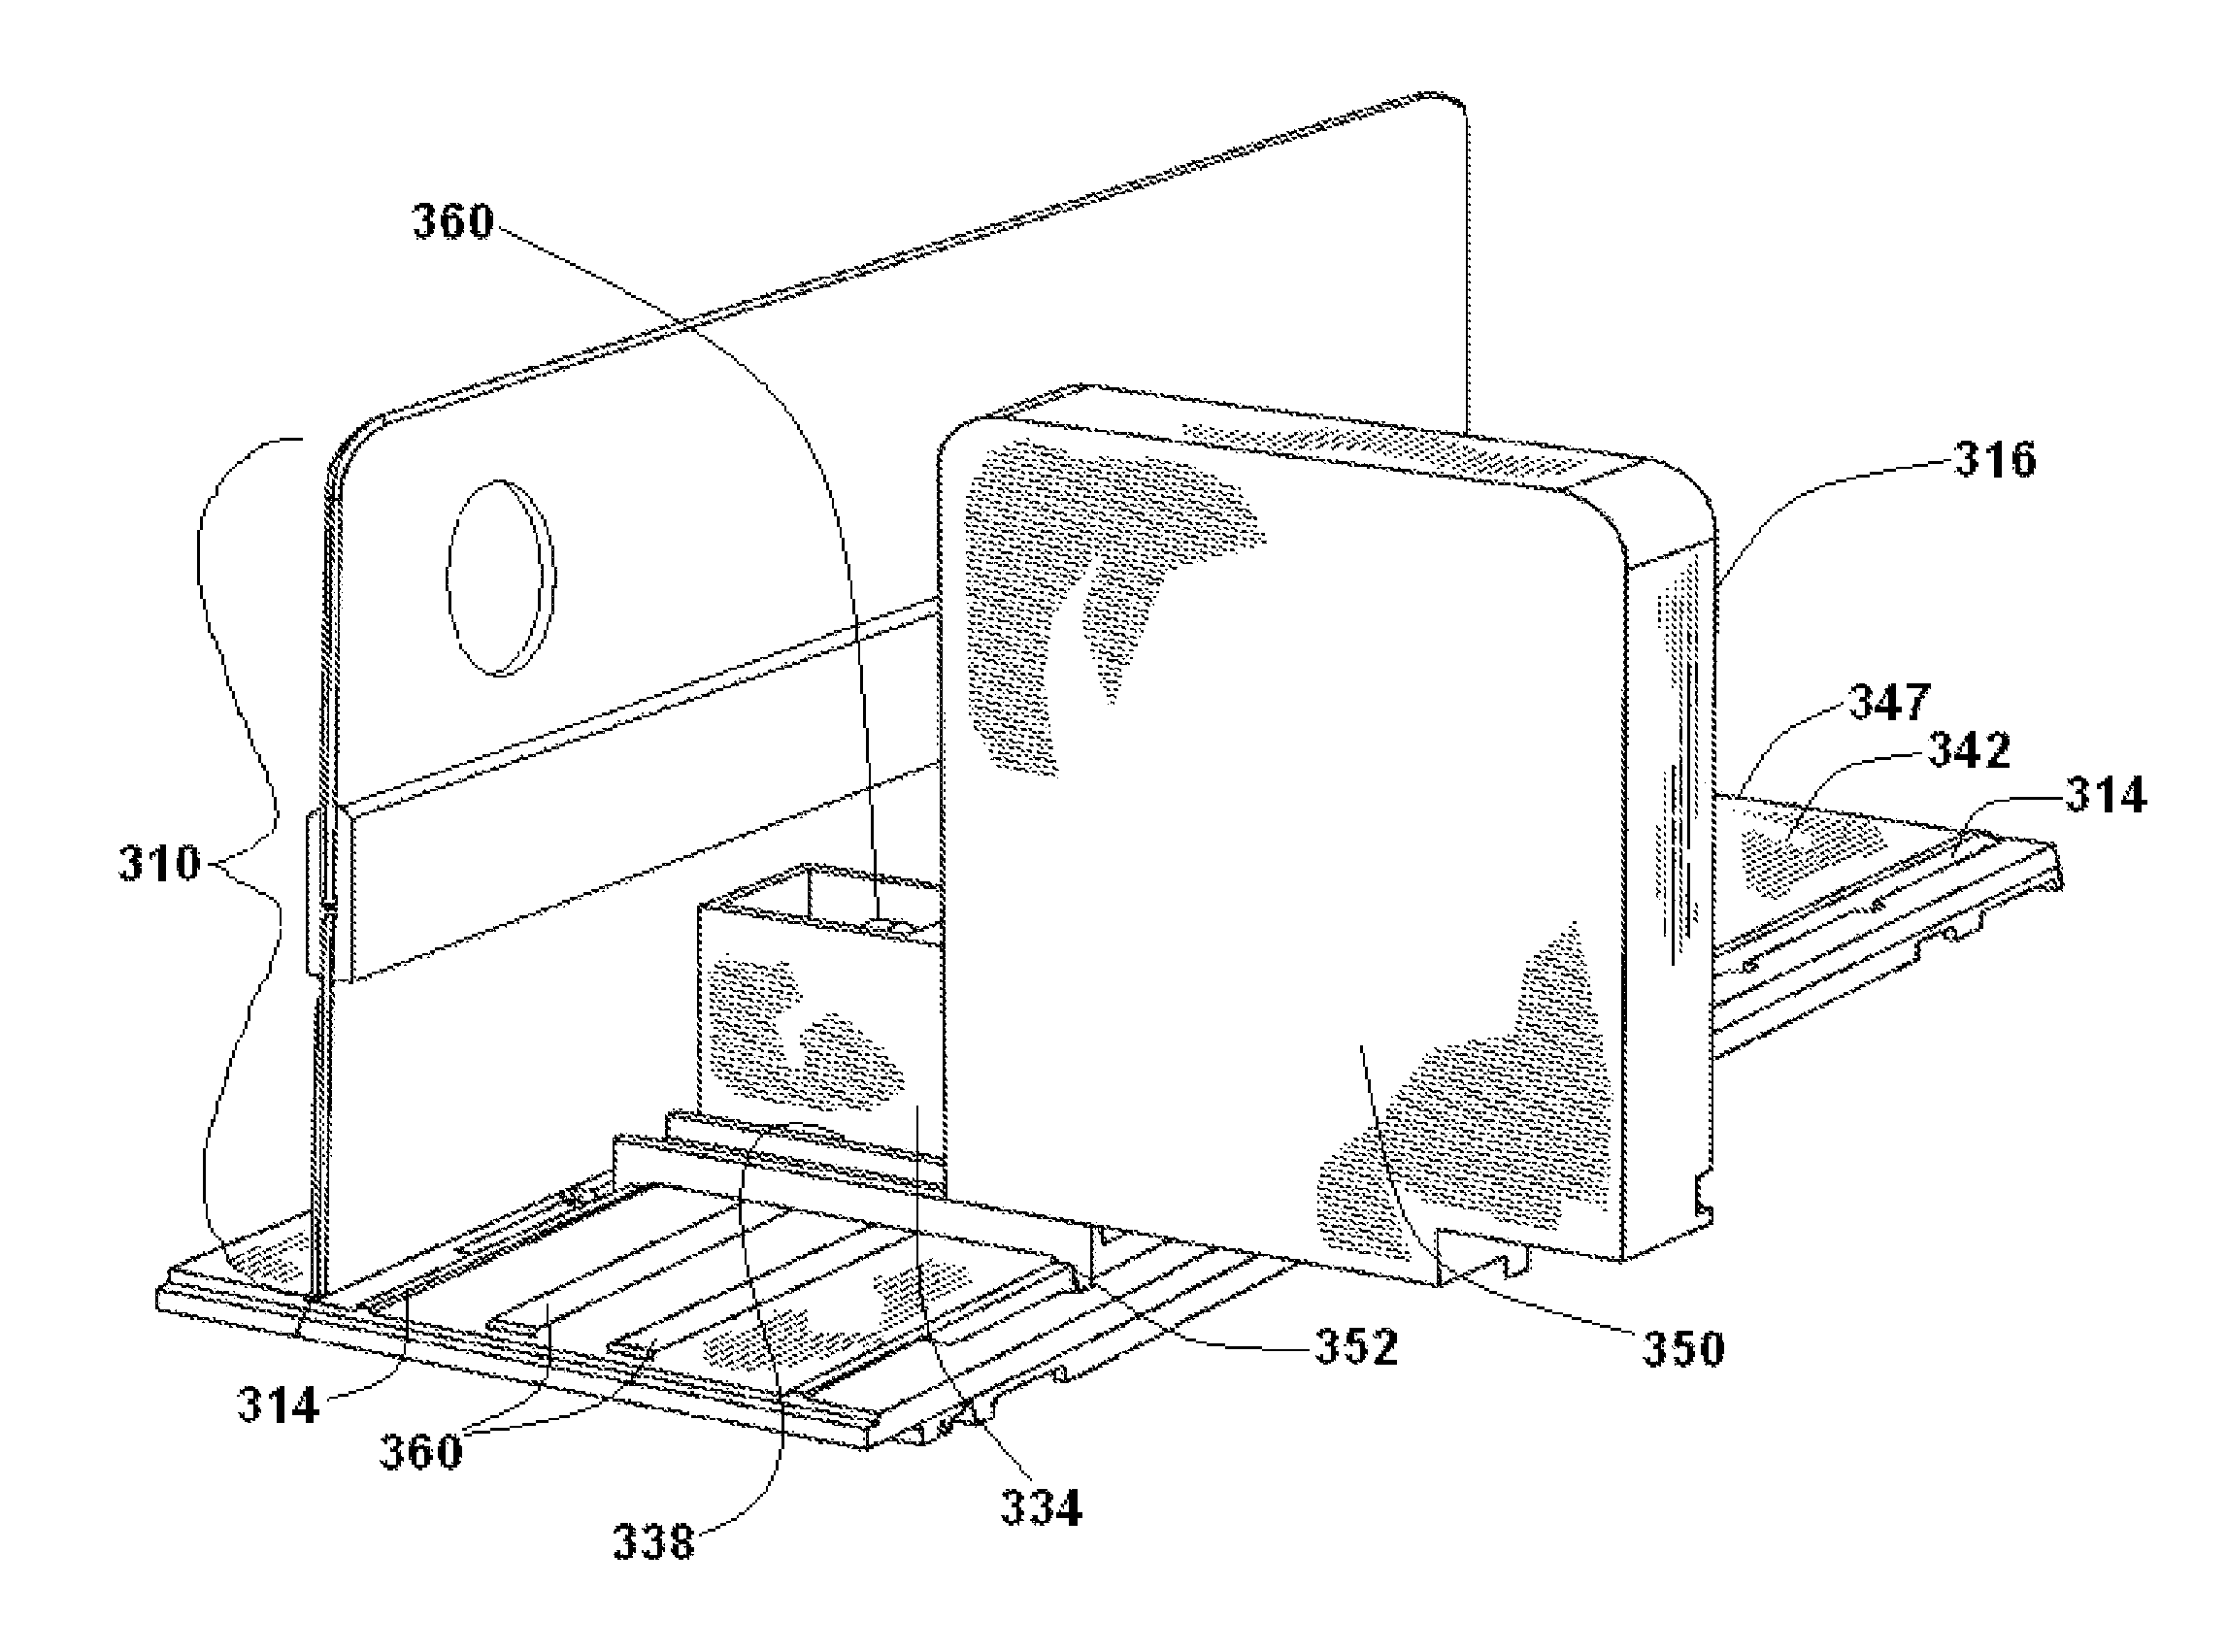 Multi-component display and merchandise systems